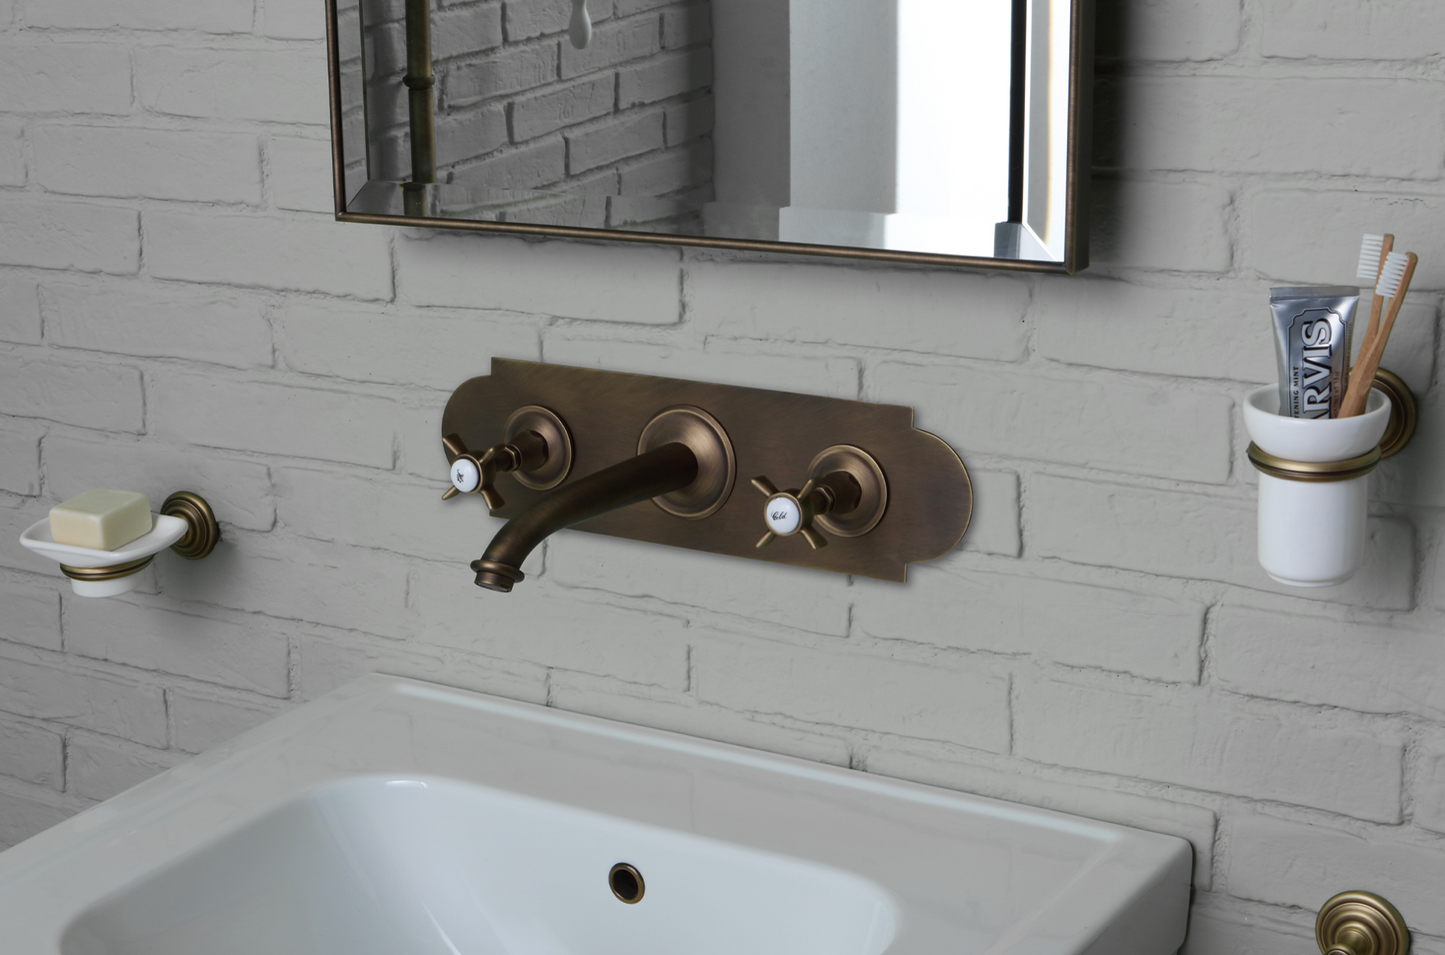 Vintage style built-in basin faucet